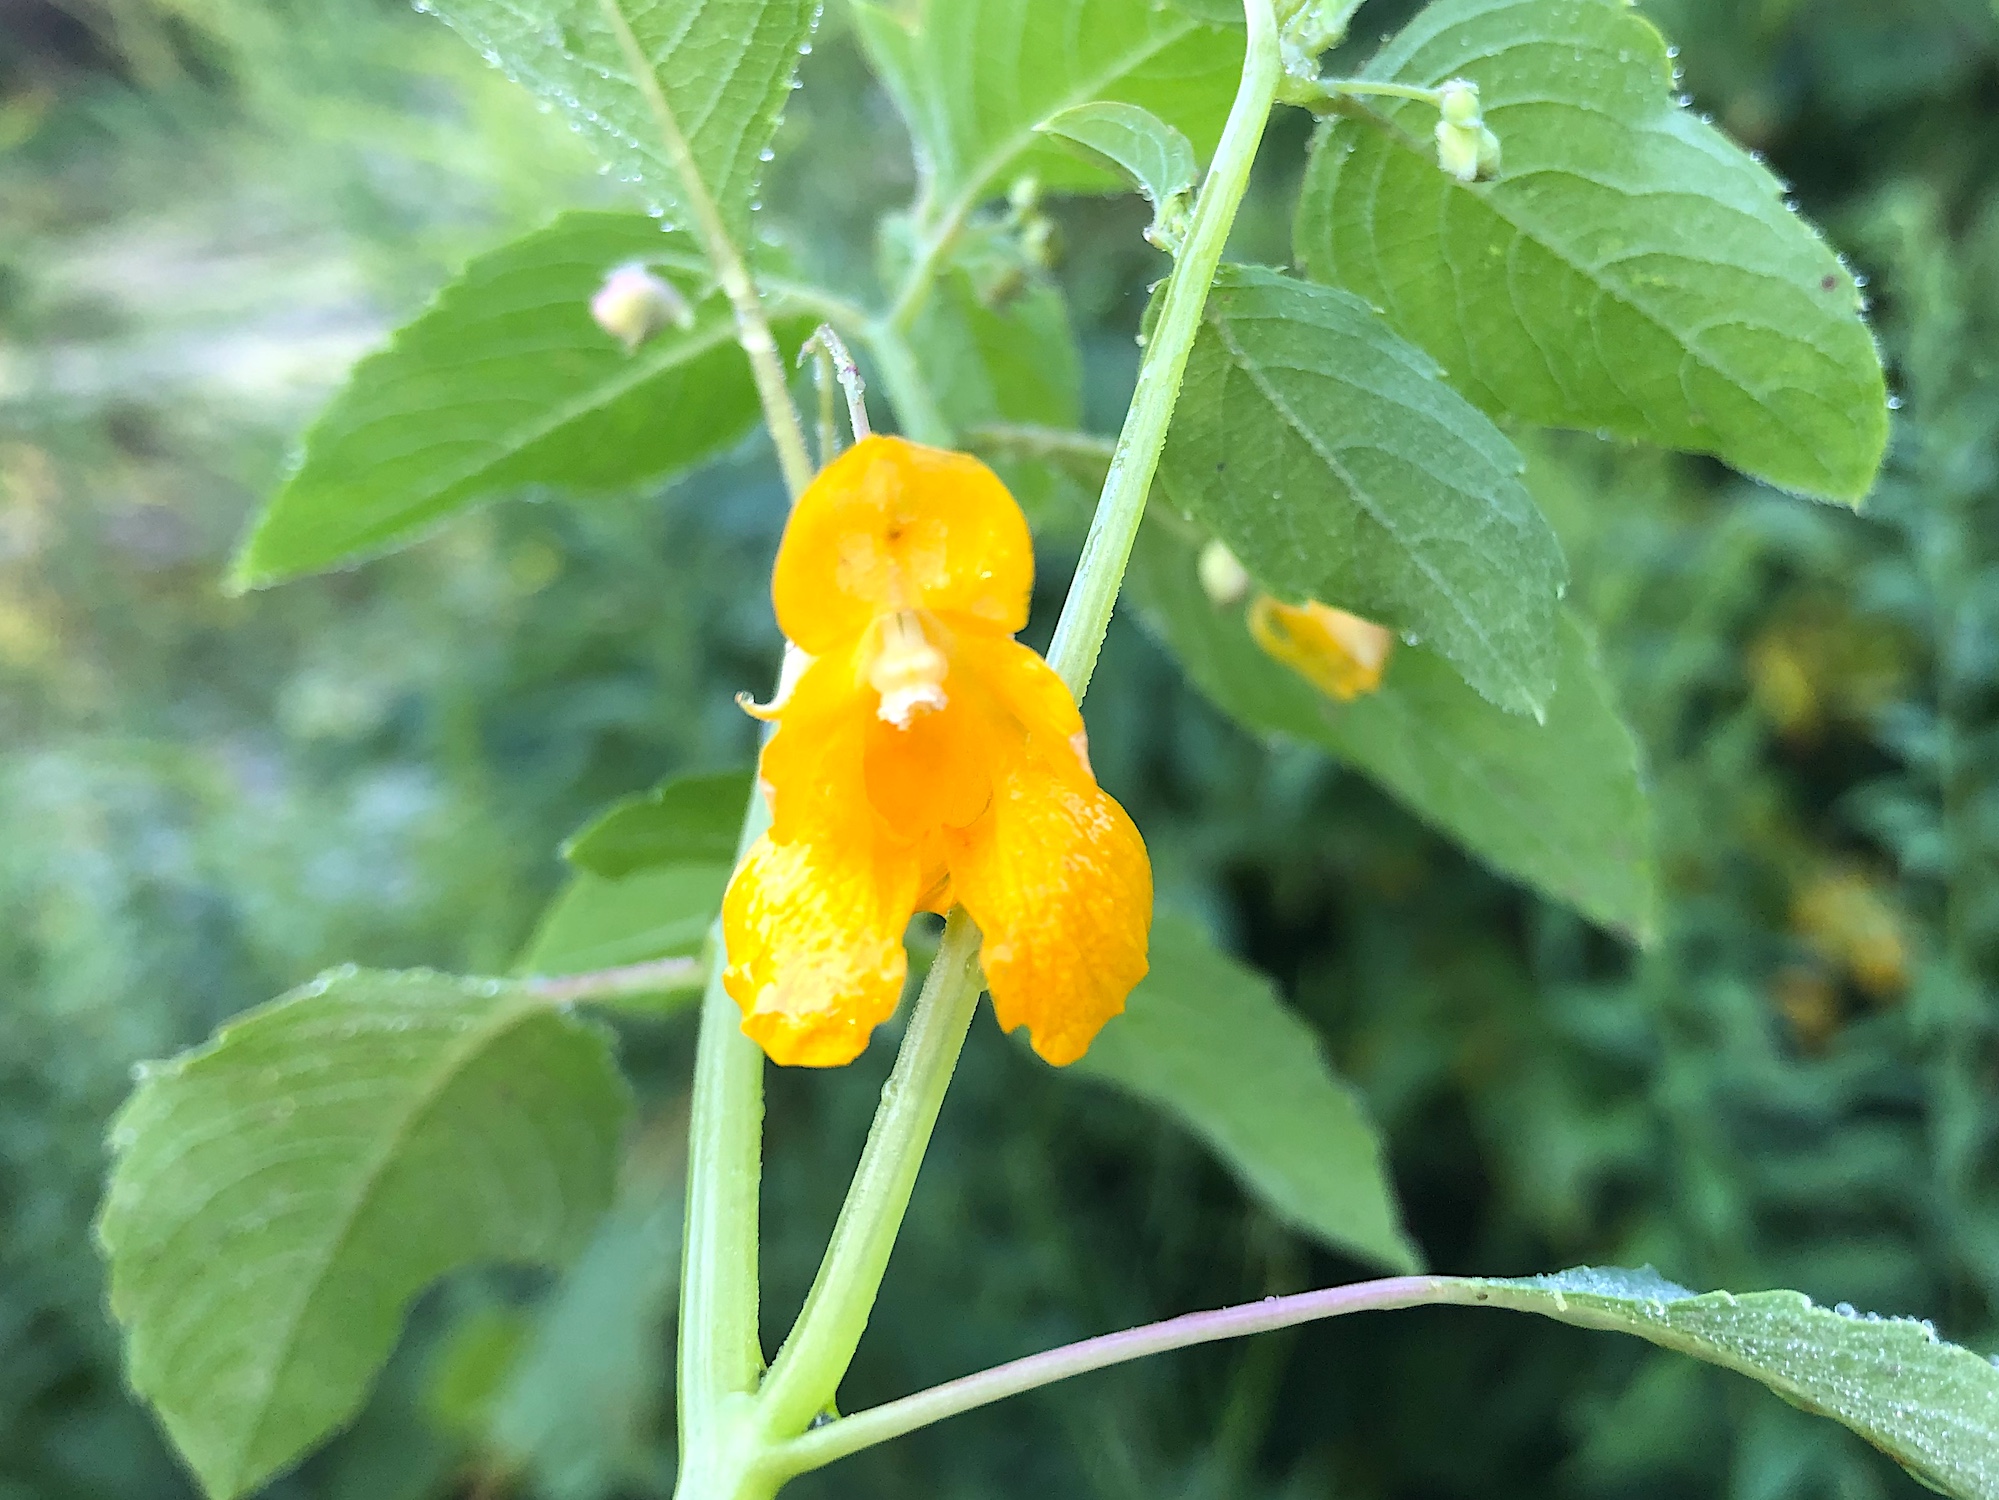 Spotted Jewelweed on shore of Duck Pond on August 3, 2019.